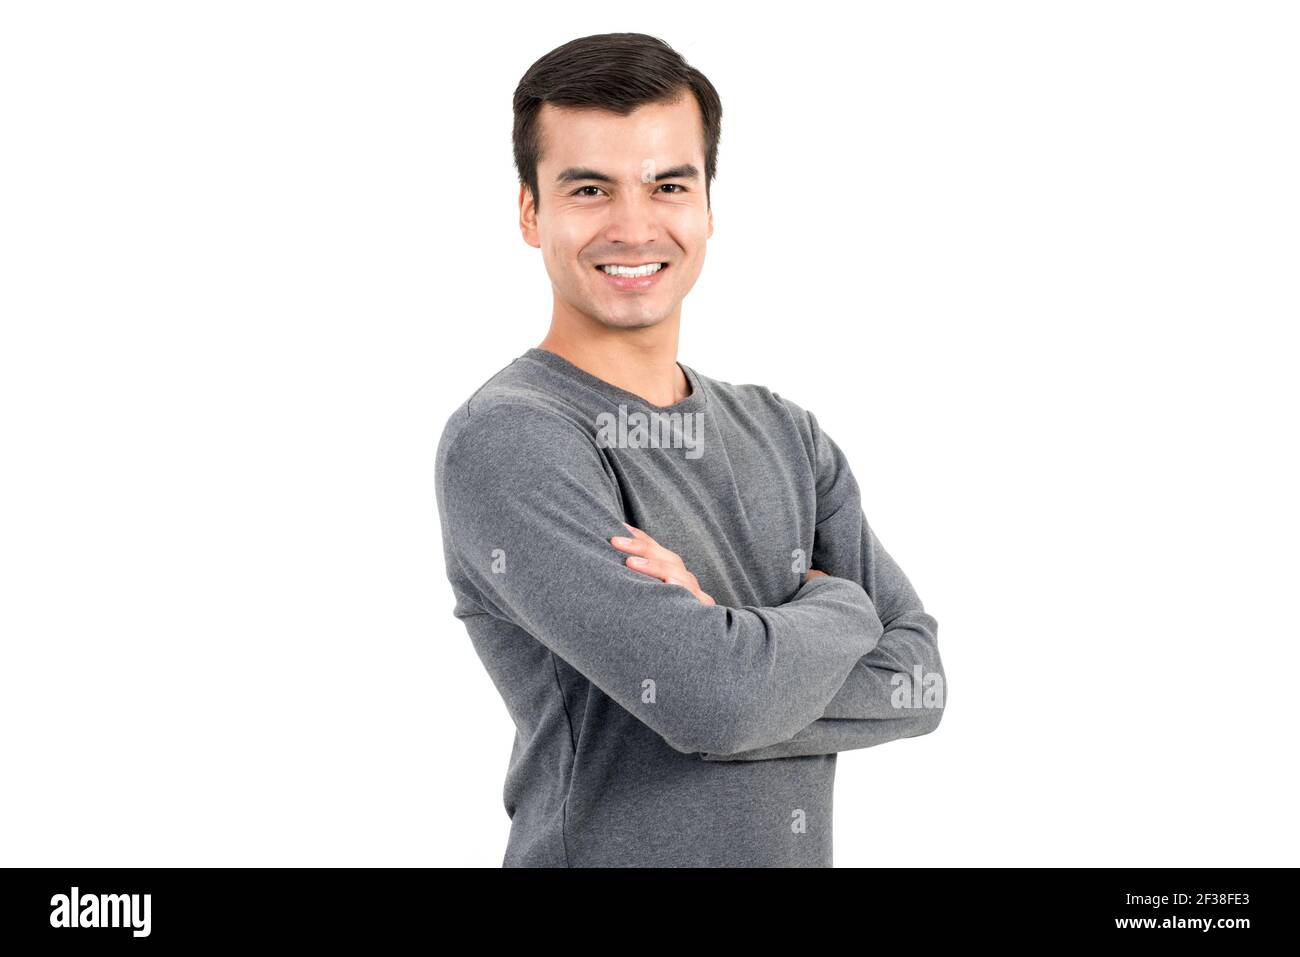 Portrait of happy smiling man wearing casual t-shirt, crossing his arms - isolated on white background Stock Photo